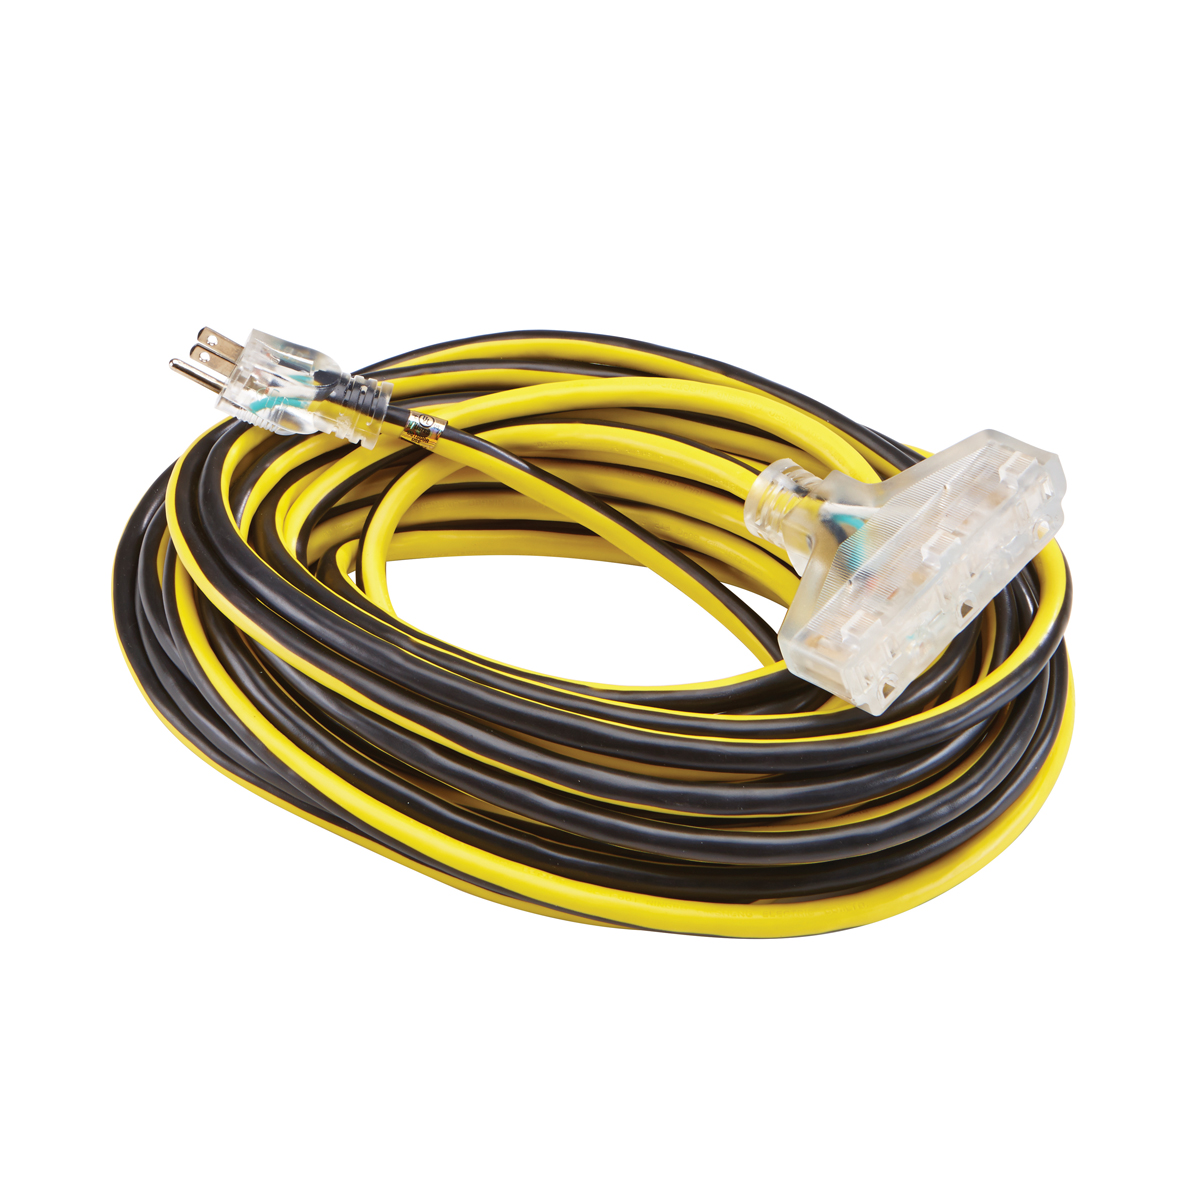 VANGUARD 50 ft. x 12 Gauge Multi-Outlet Extension Cord with Indicator Light - Item 62903 / 61953 / 62904 / 96709